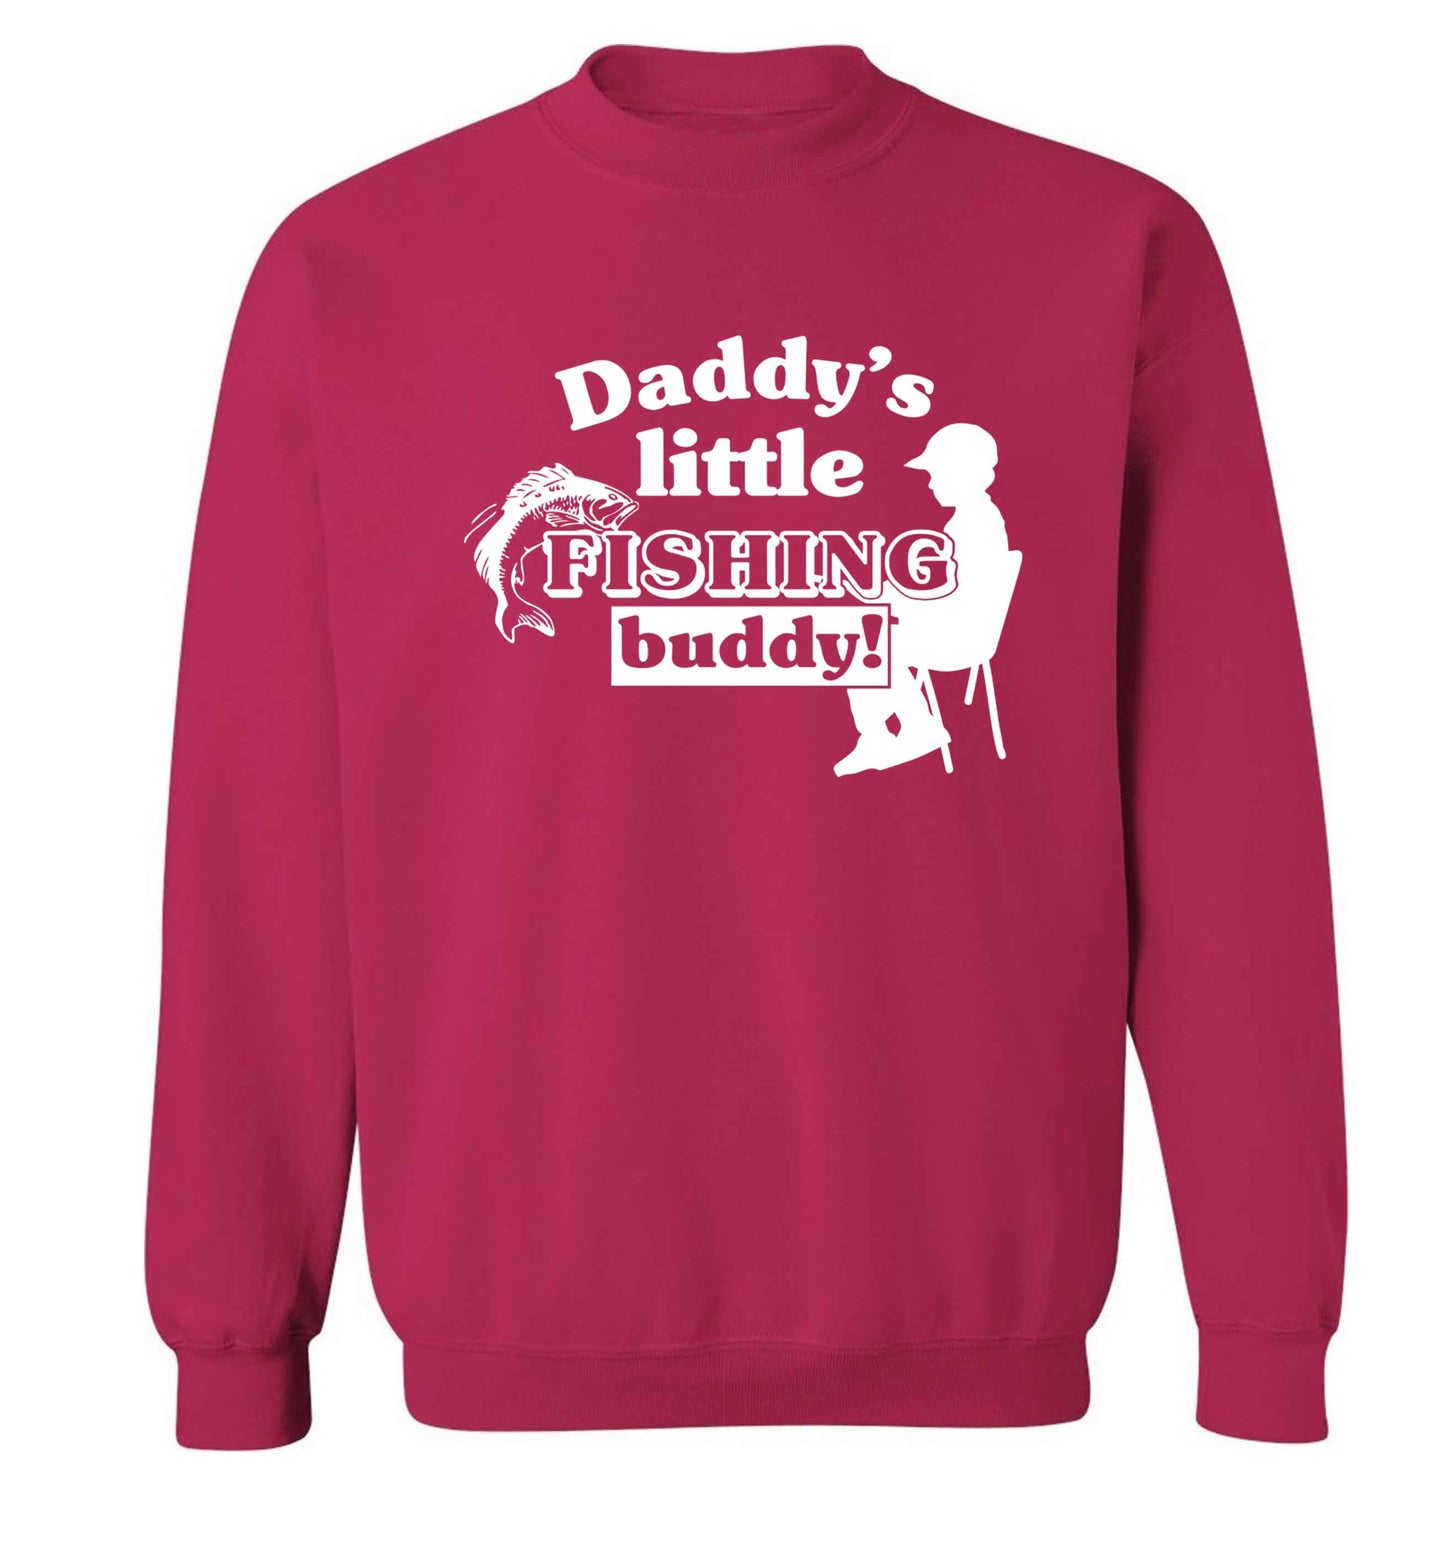 Daddy's little fishing buddy Adult's unisex pink Sweater 2XL